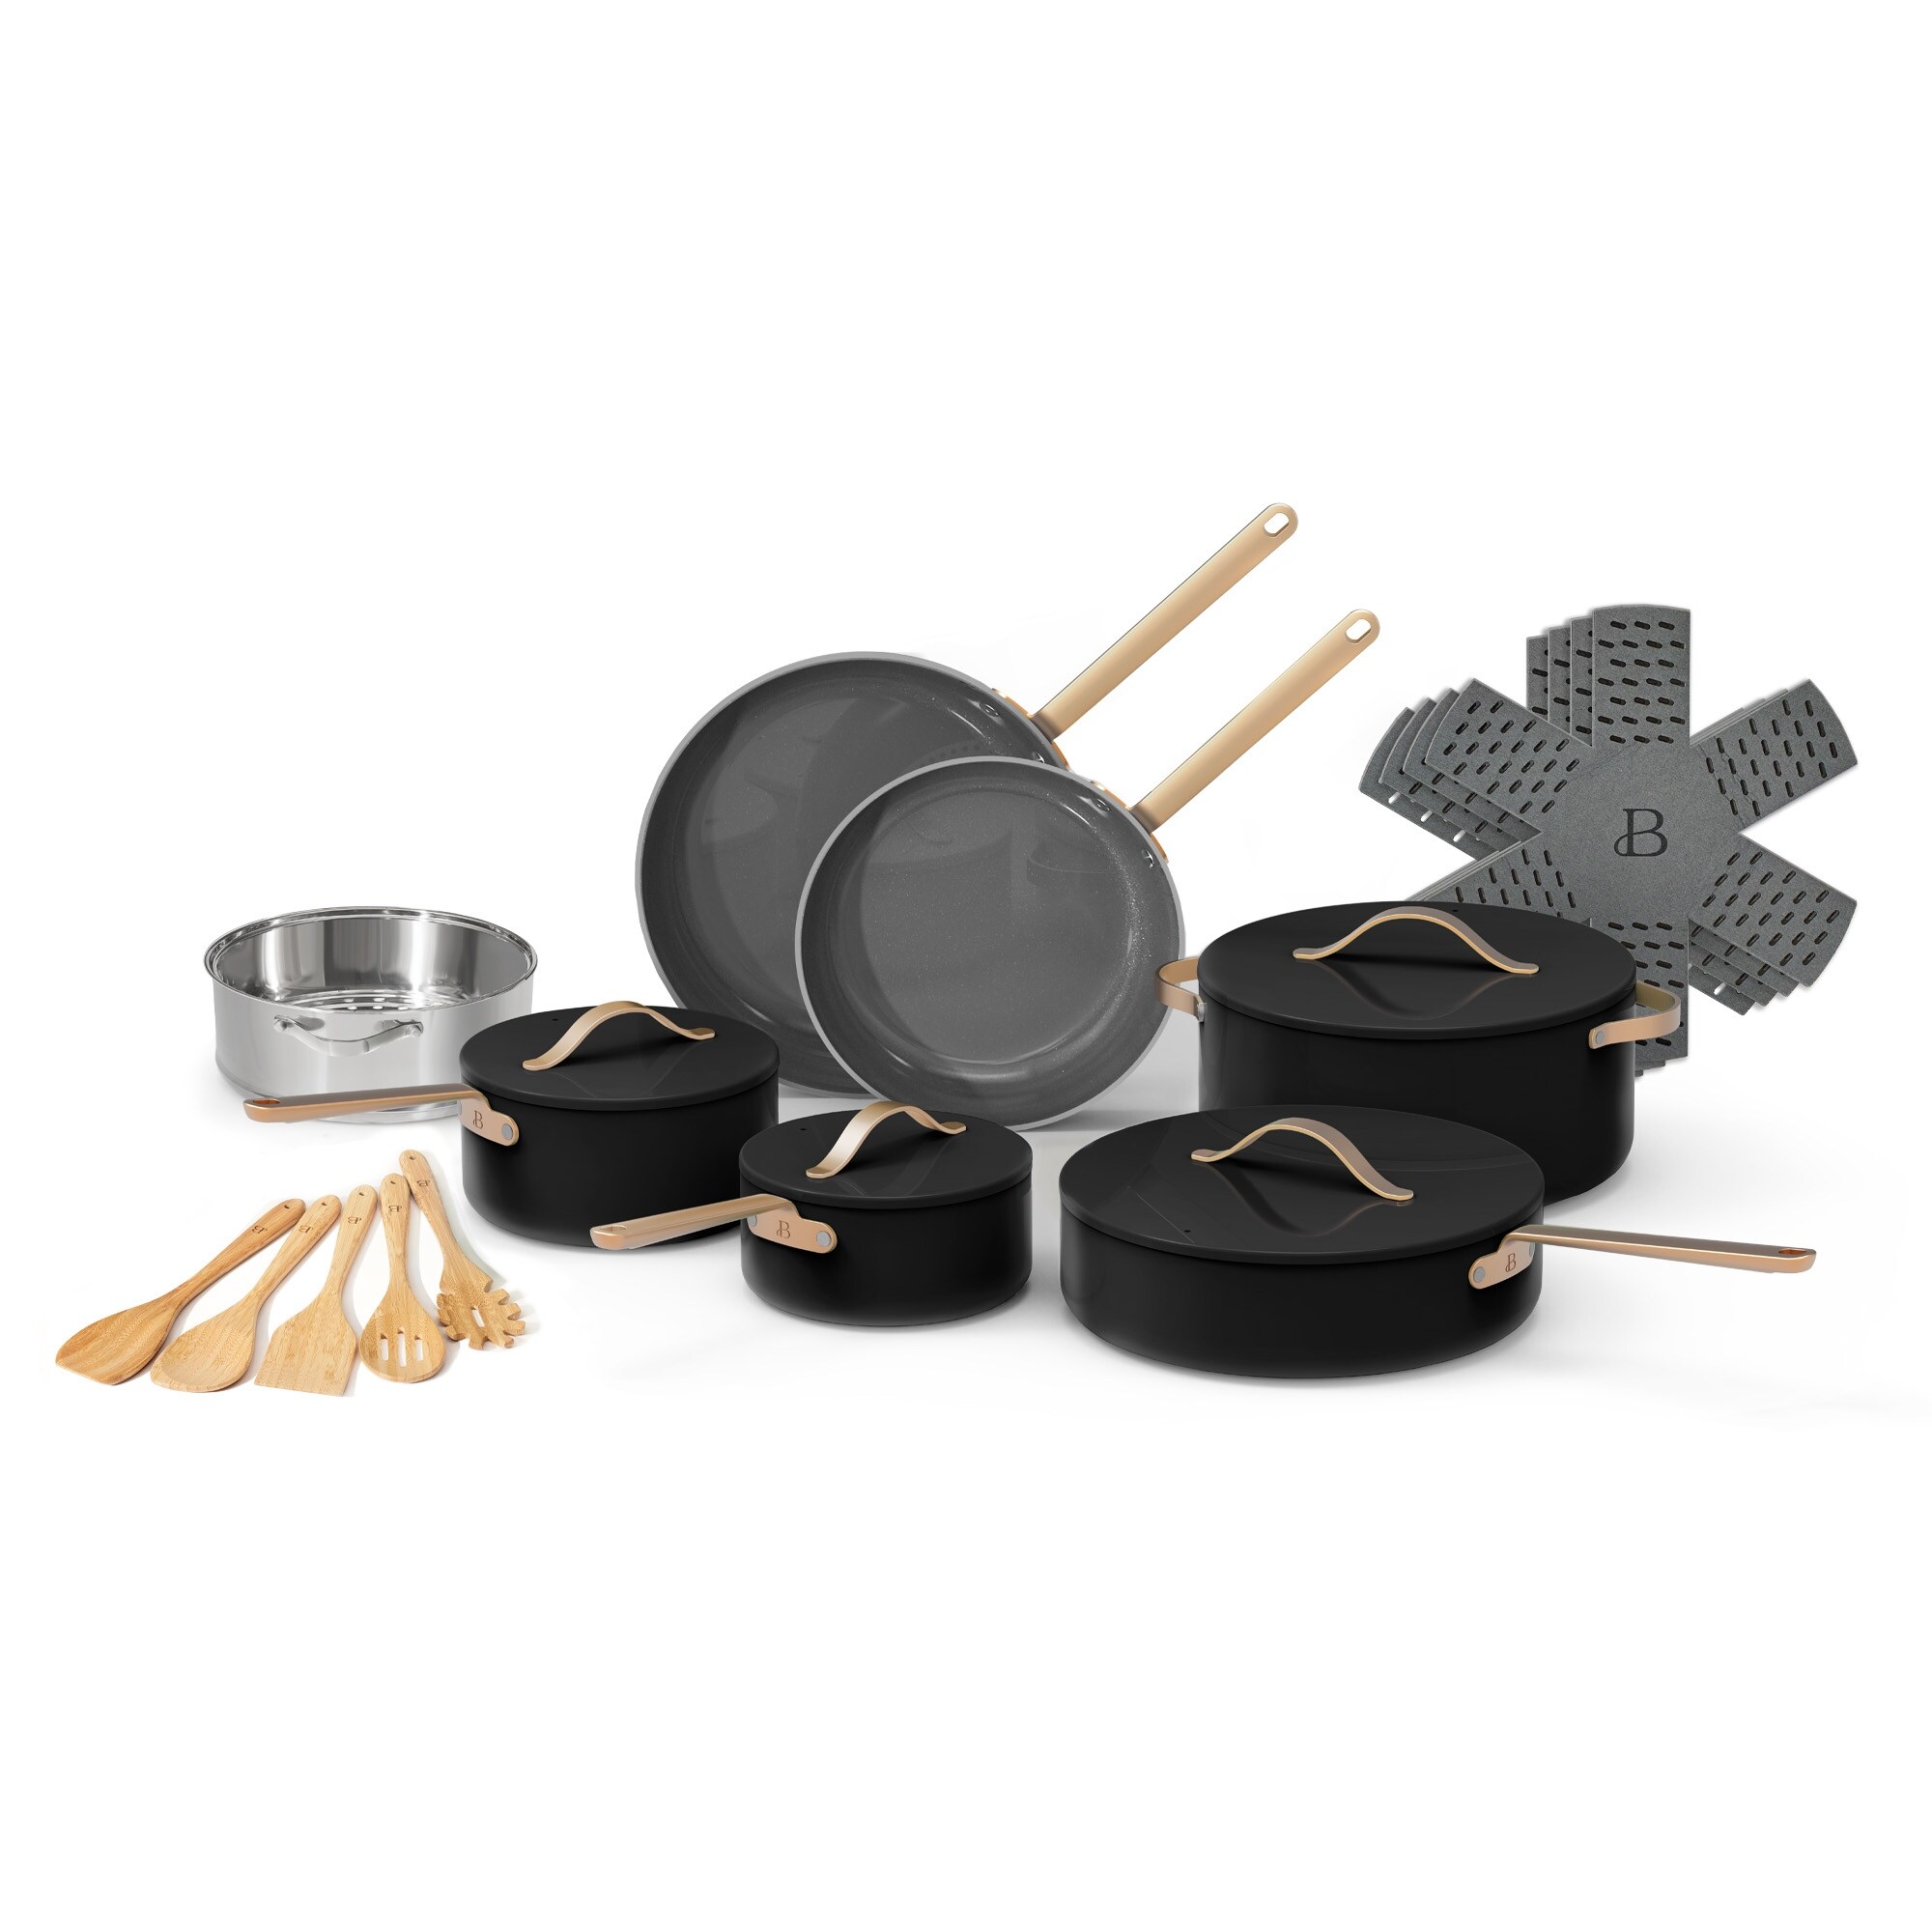 https://ak1.ostkcdn.com/images/products/is/images/direct/f17780e0d28770b4280a3c0faefb5feefcaa8749/20pc-Ceramic-Non-Stick-Cookware-Set%2C-Cornflower-Blue%2C-by-Drew-Barrymore.jpg